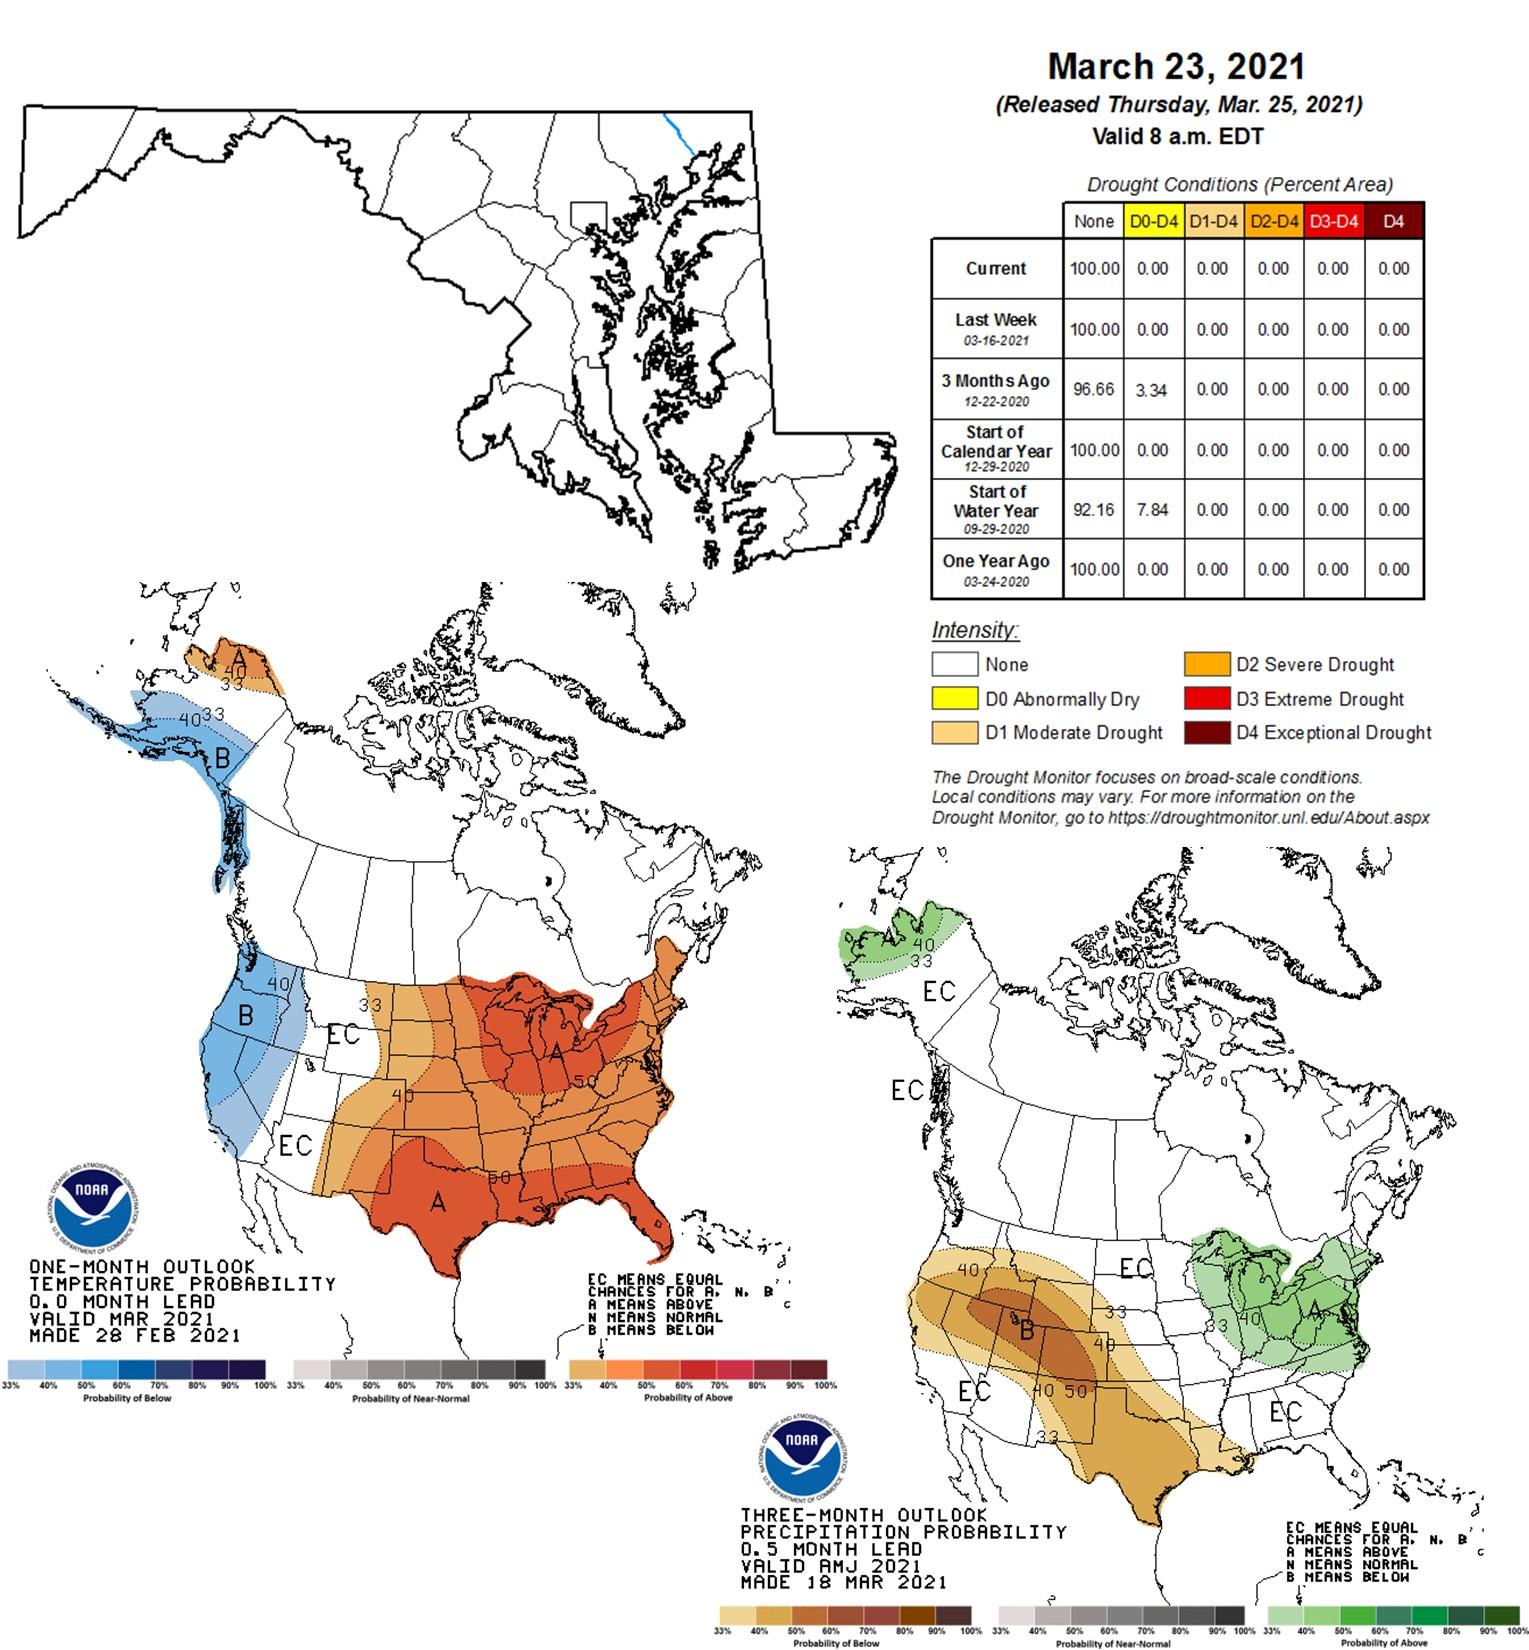 Drought Conditions Chart for March 23, 2021